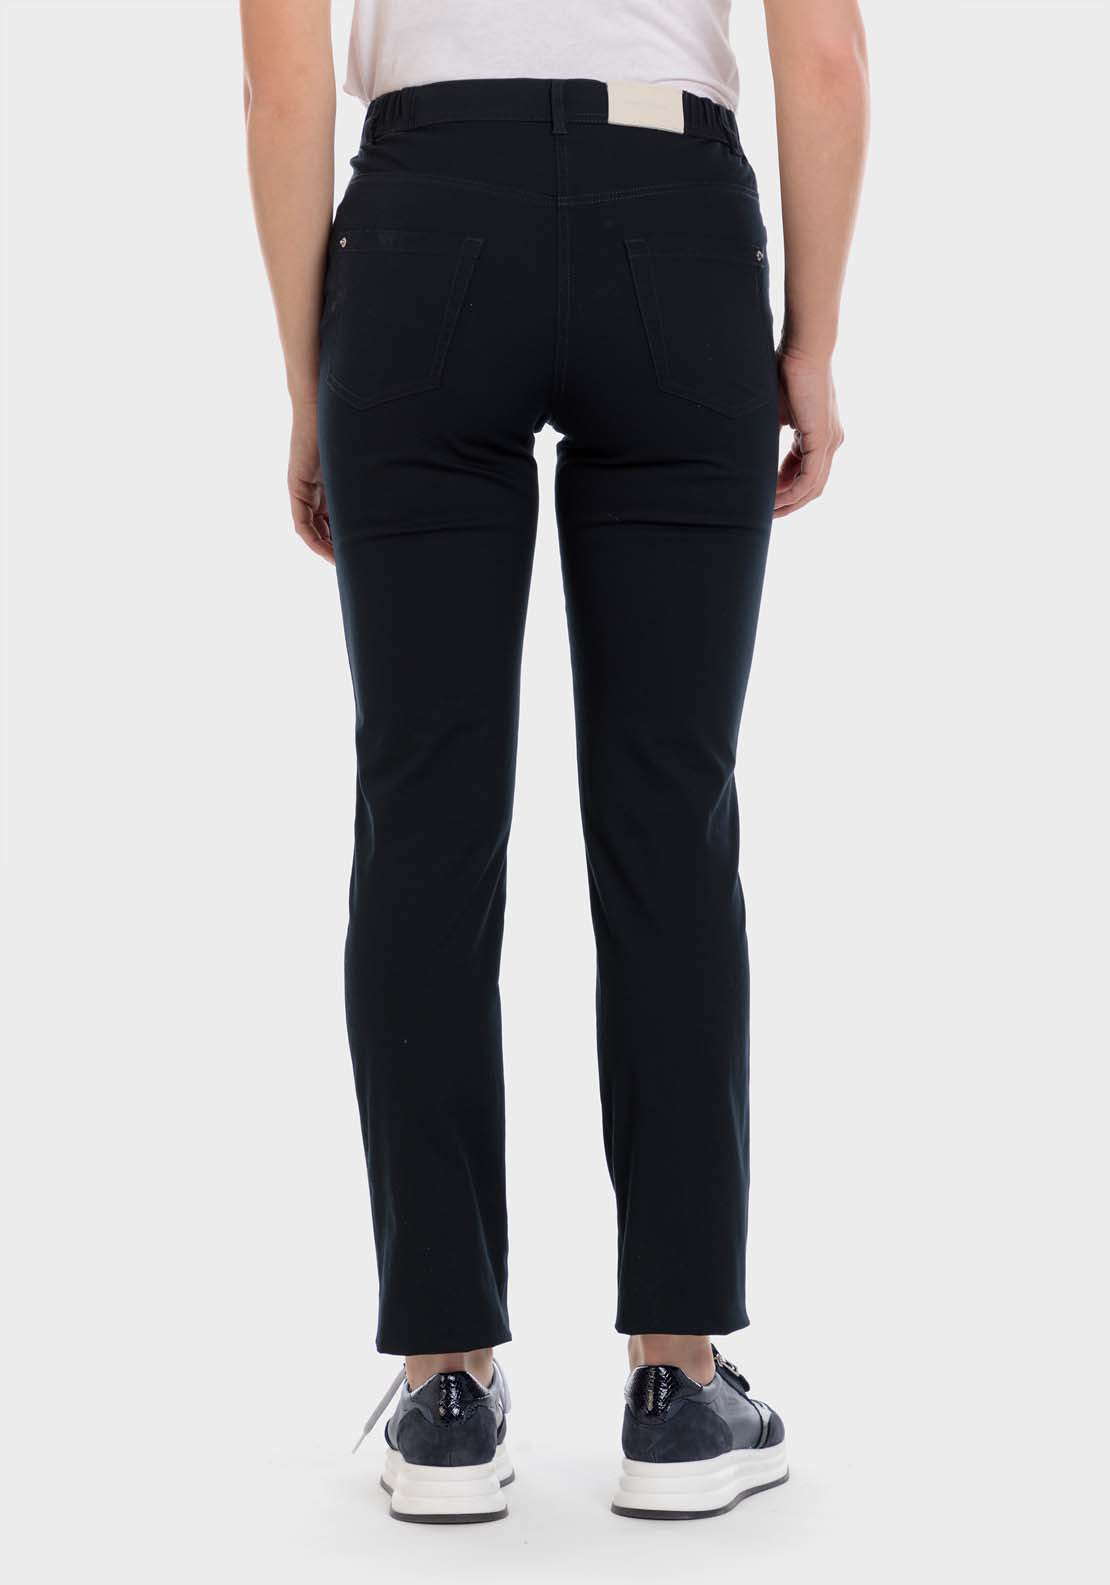 Punt Roma Cotton Trousers With Elastic 1 Shaws Department Stores